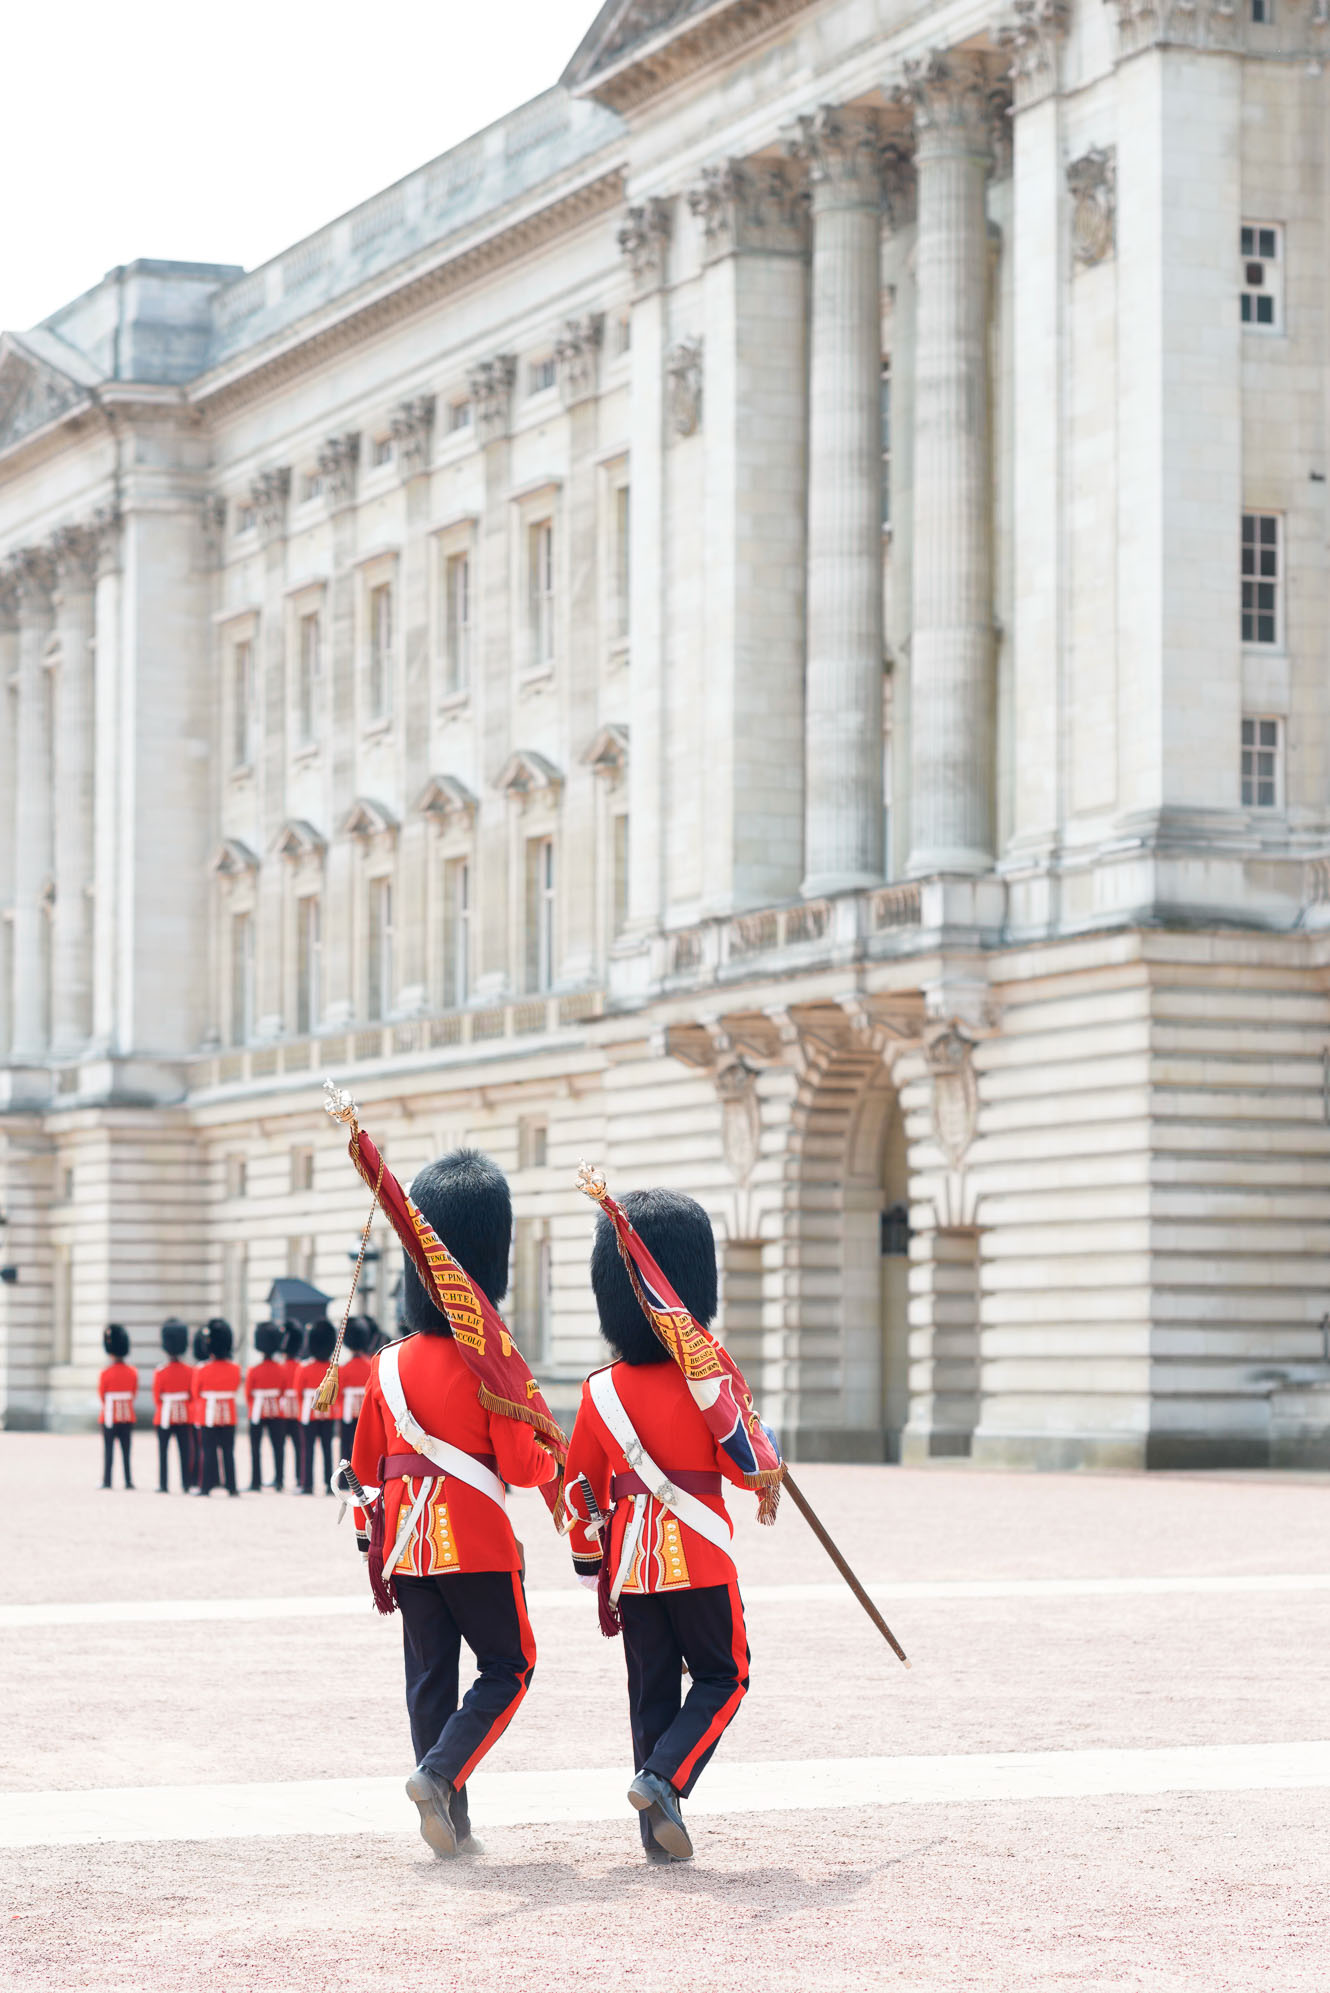 Guards in London